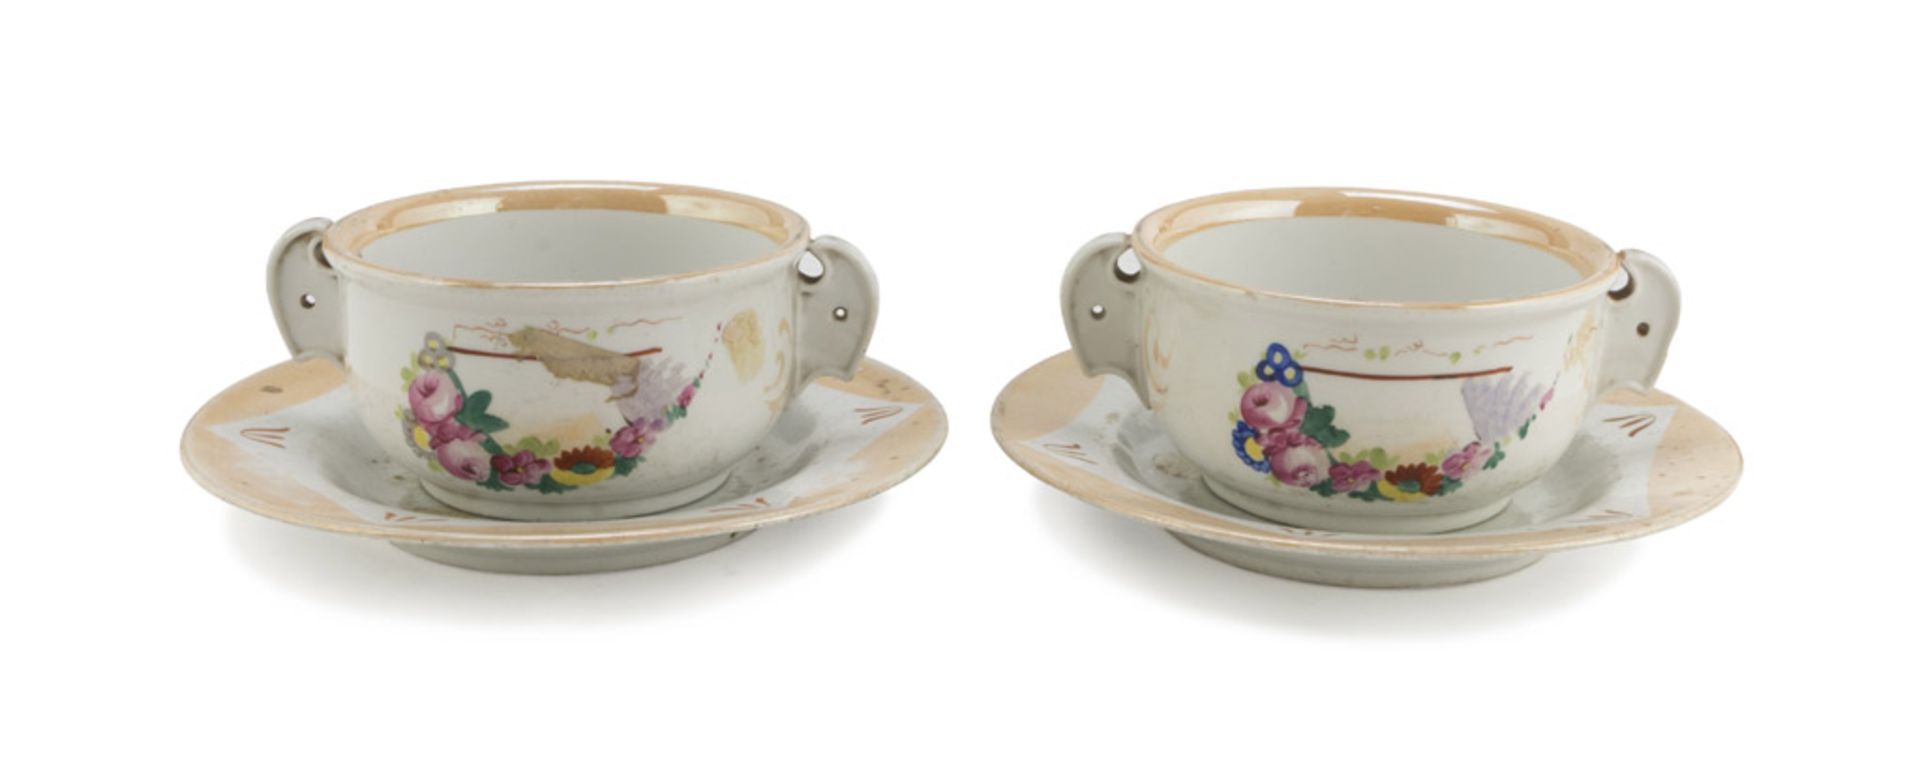 TWO SOUP CUPS IN PORCELAIN, 19TH CENTURY with saucers, in white, yellow and polychrome enamel,